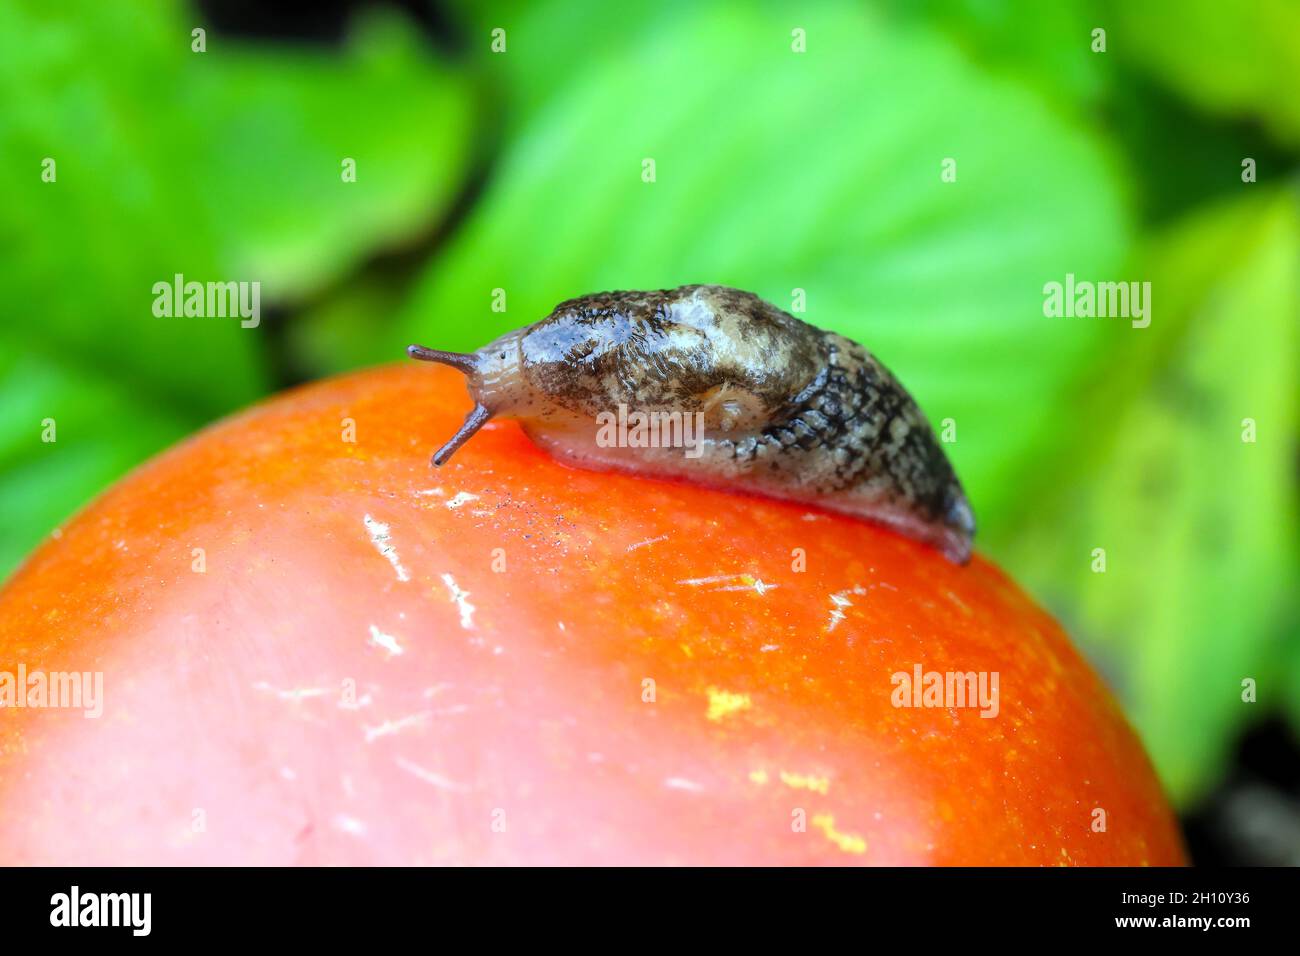 Slug - plant pest on tomato. Snails It eats a variety of plants in the garden including vegetables, flowers and herbs. Stock Photo